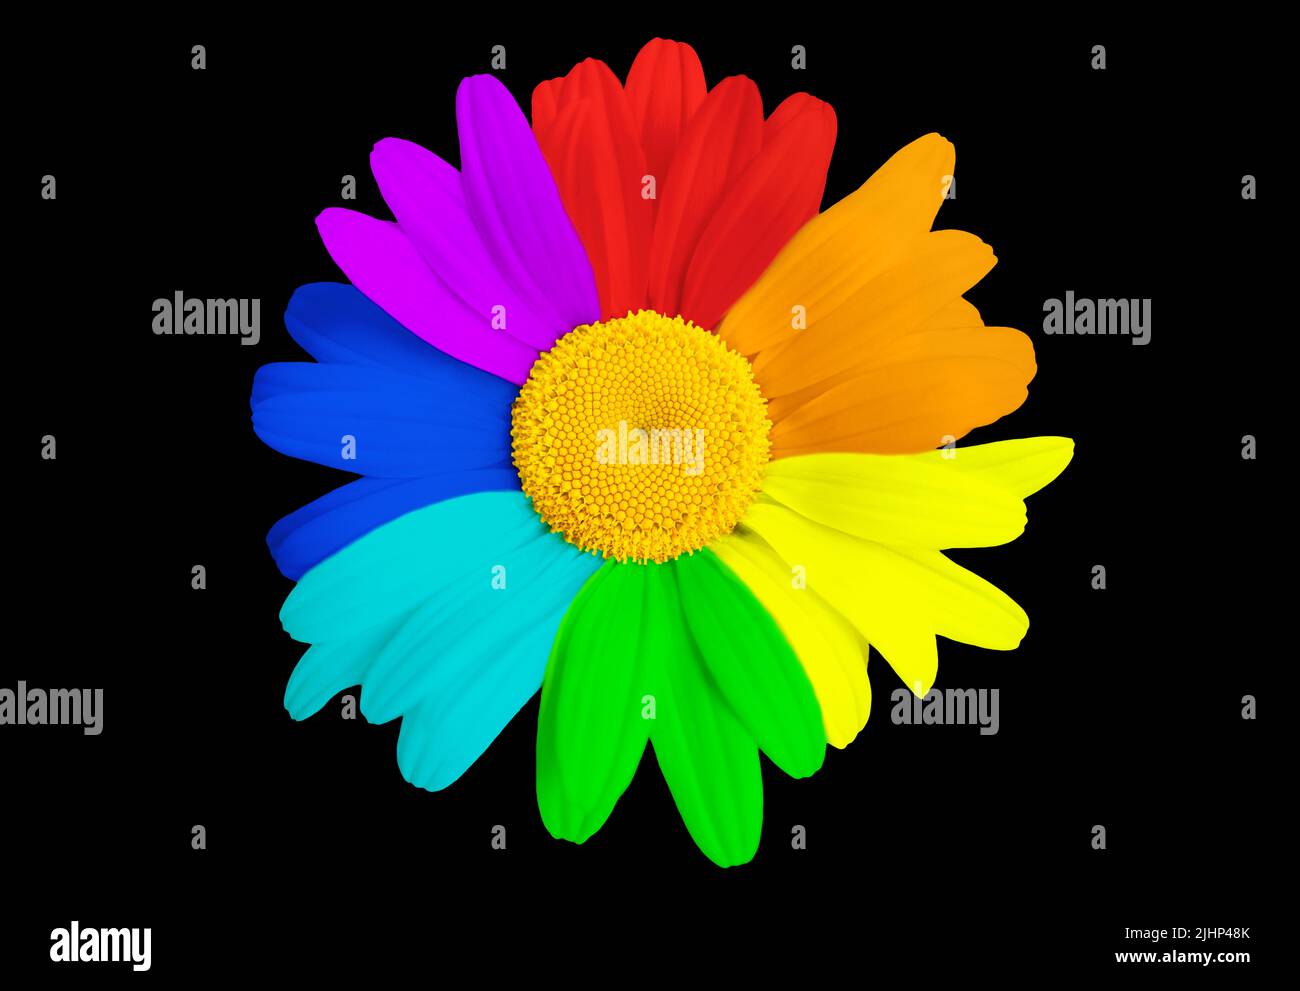 Close-up of a large rainbow colored daisy flower head isolated on black background. Stock Photo